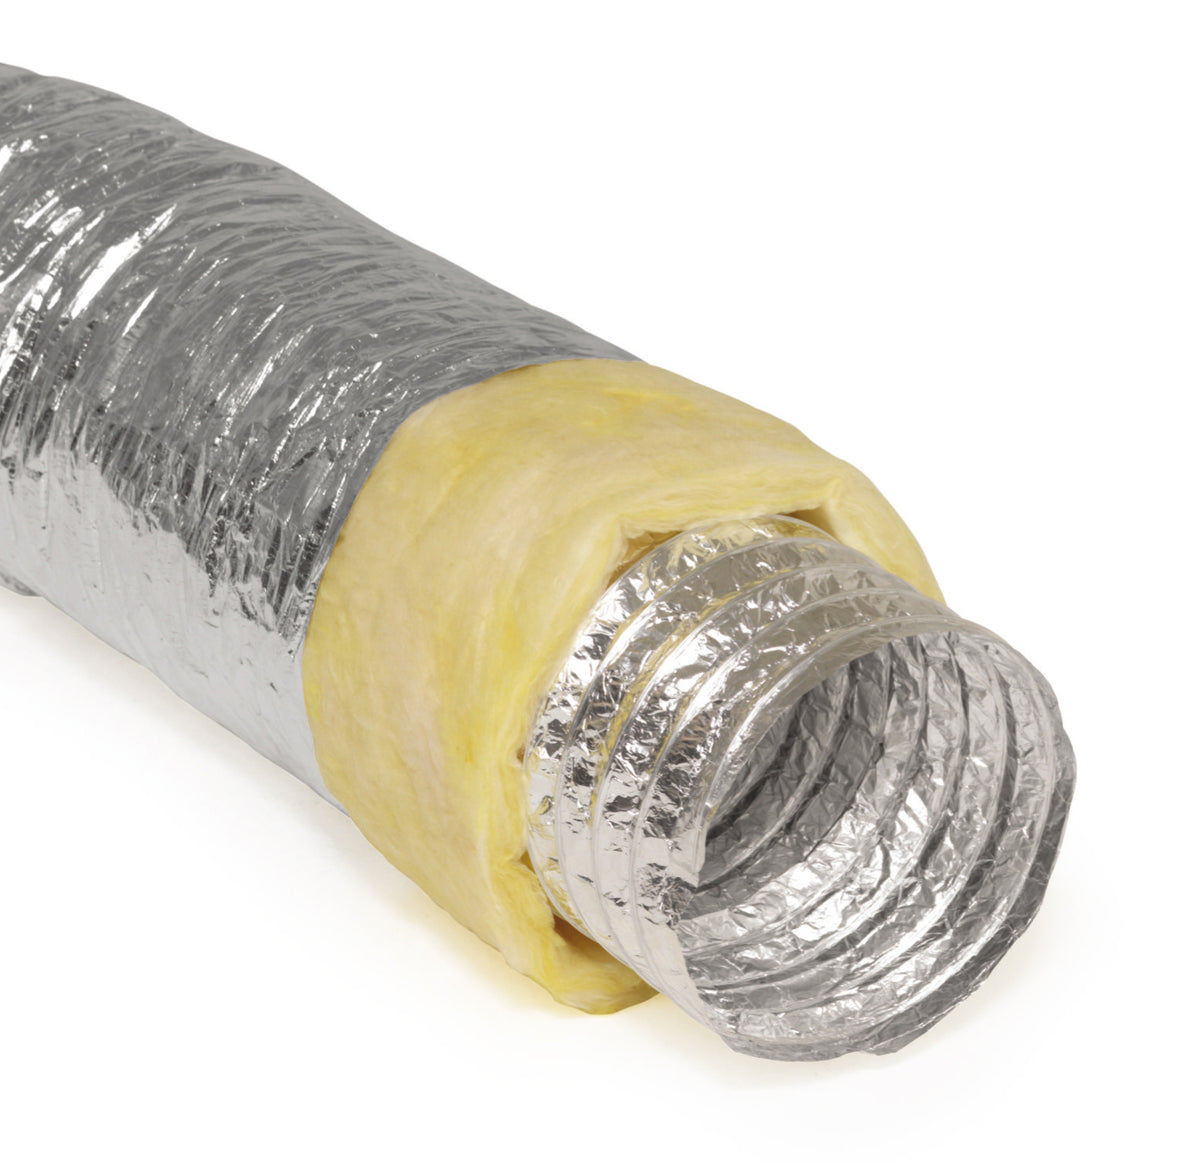 12&quot; Inch Aluminum Hose Flexible Insulated R-4.2 Air Duct Pipe for Rigid HVAC Flex Ductwork Insulation - 25&#39; Feet Long